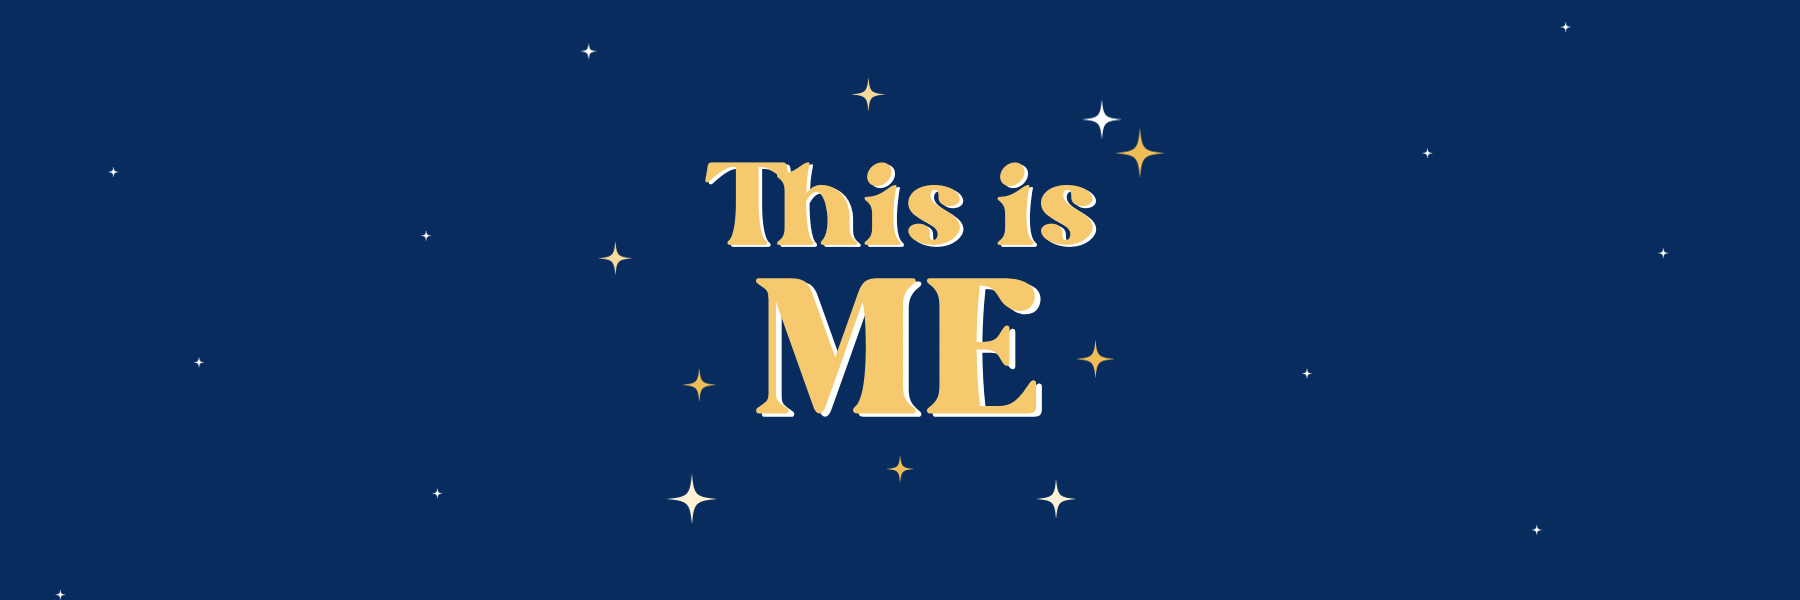 This is ME banner (1200 x 400 px)